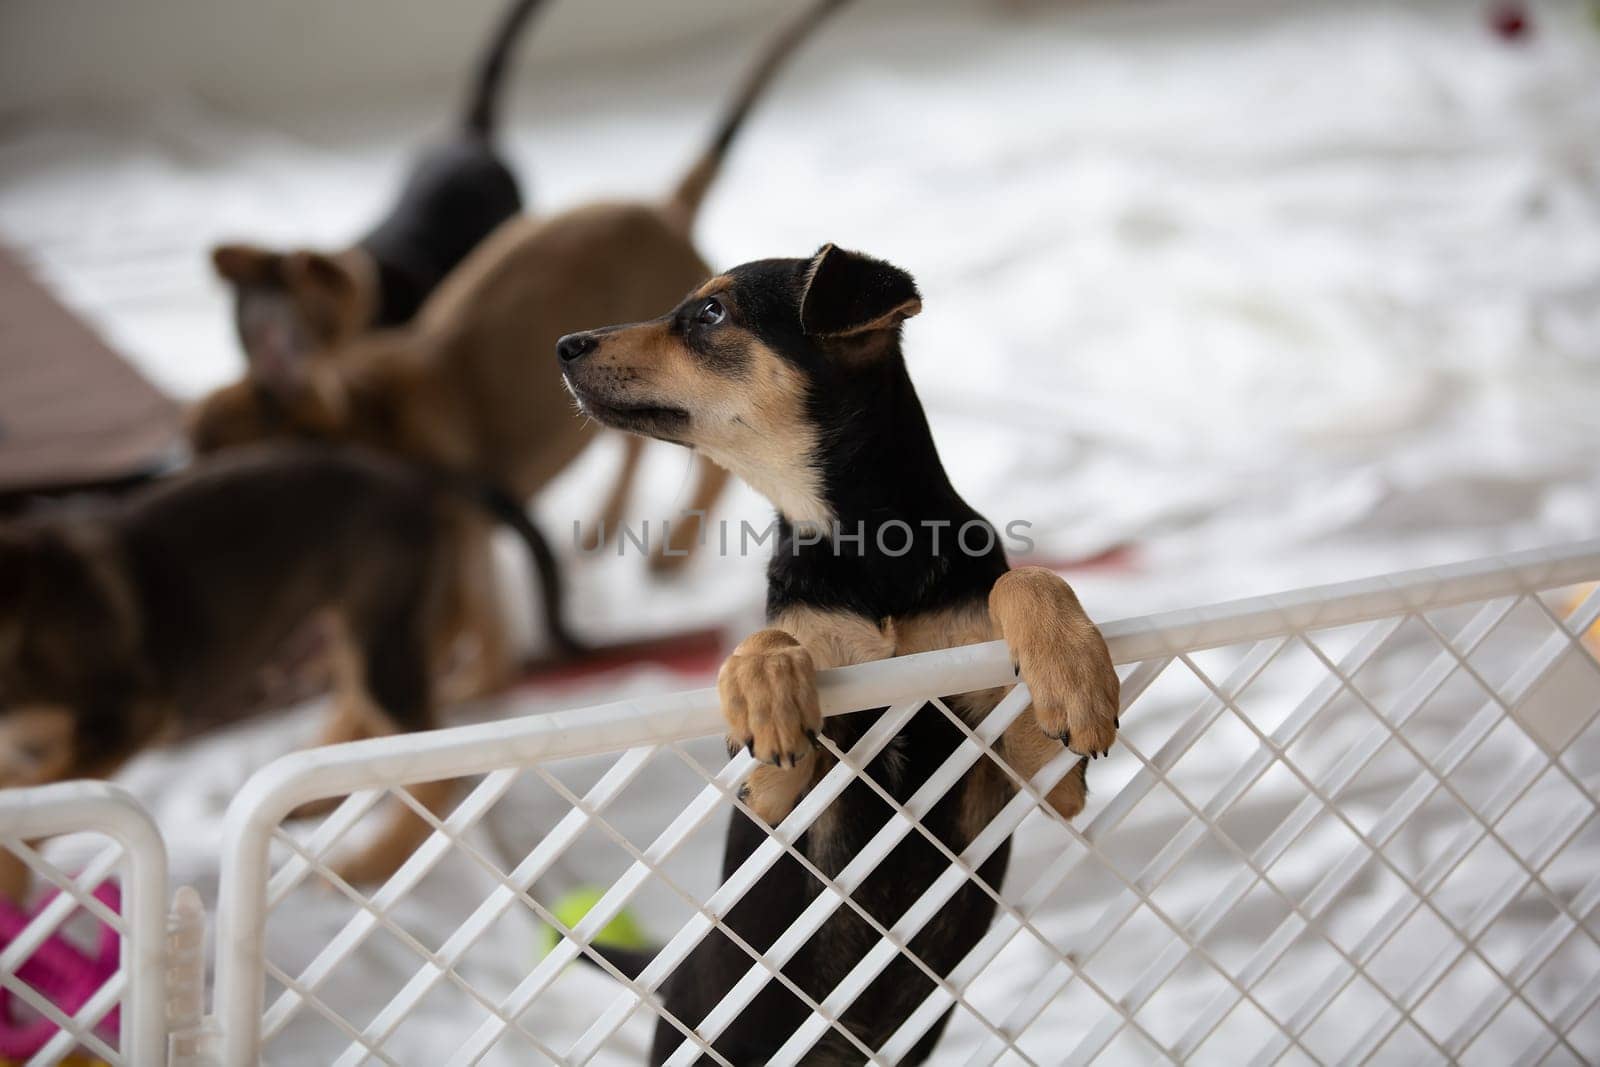 Sad puppy in shelter behind fence waiting to be rescued and adopted to new home. Shelter for animals concept. by sarymsakov